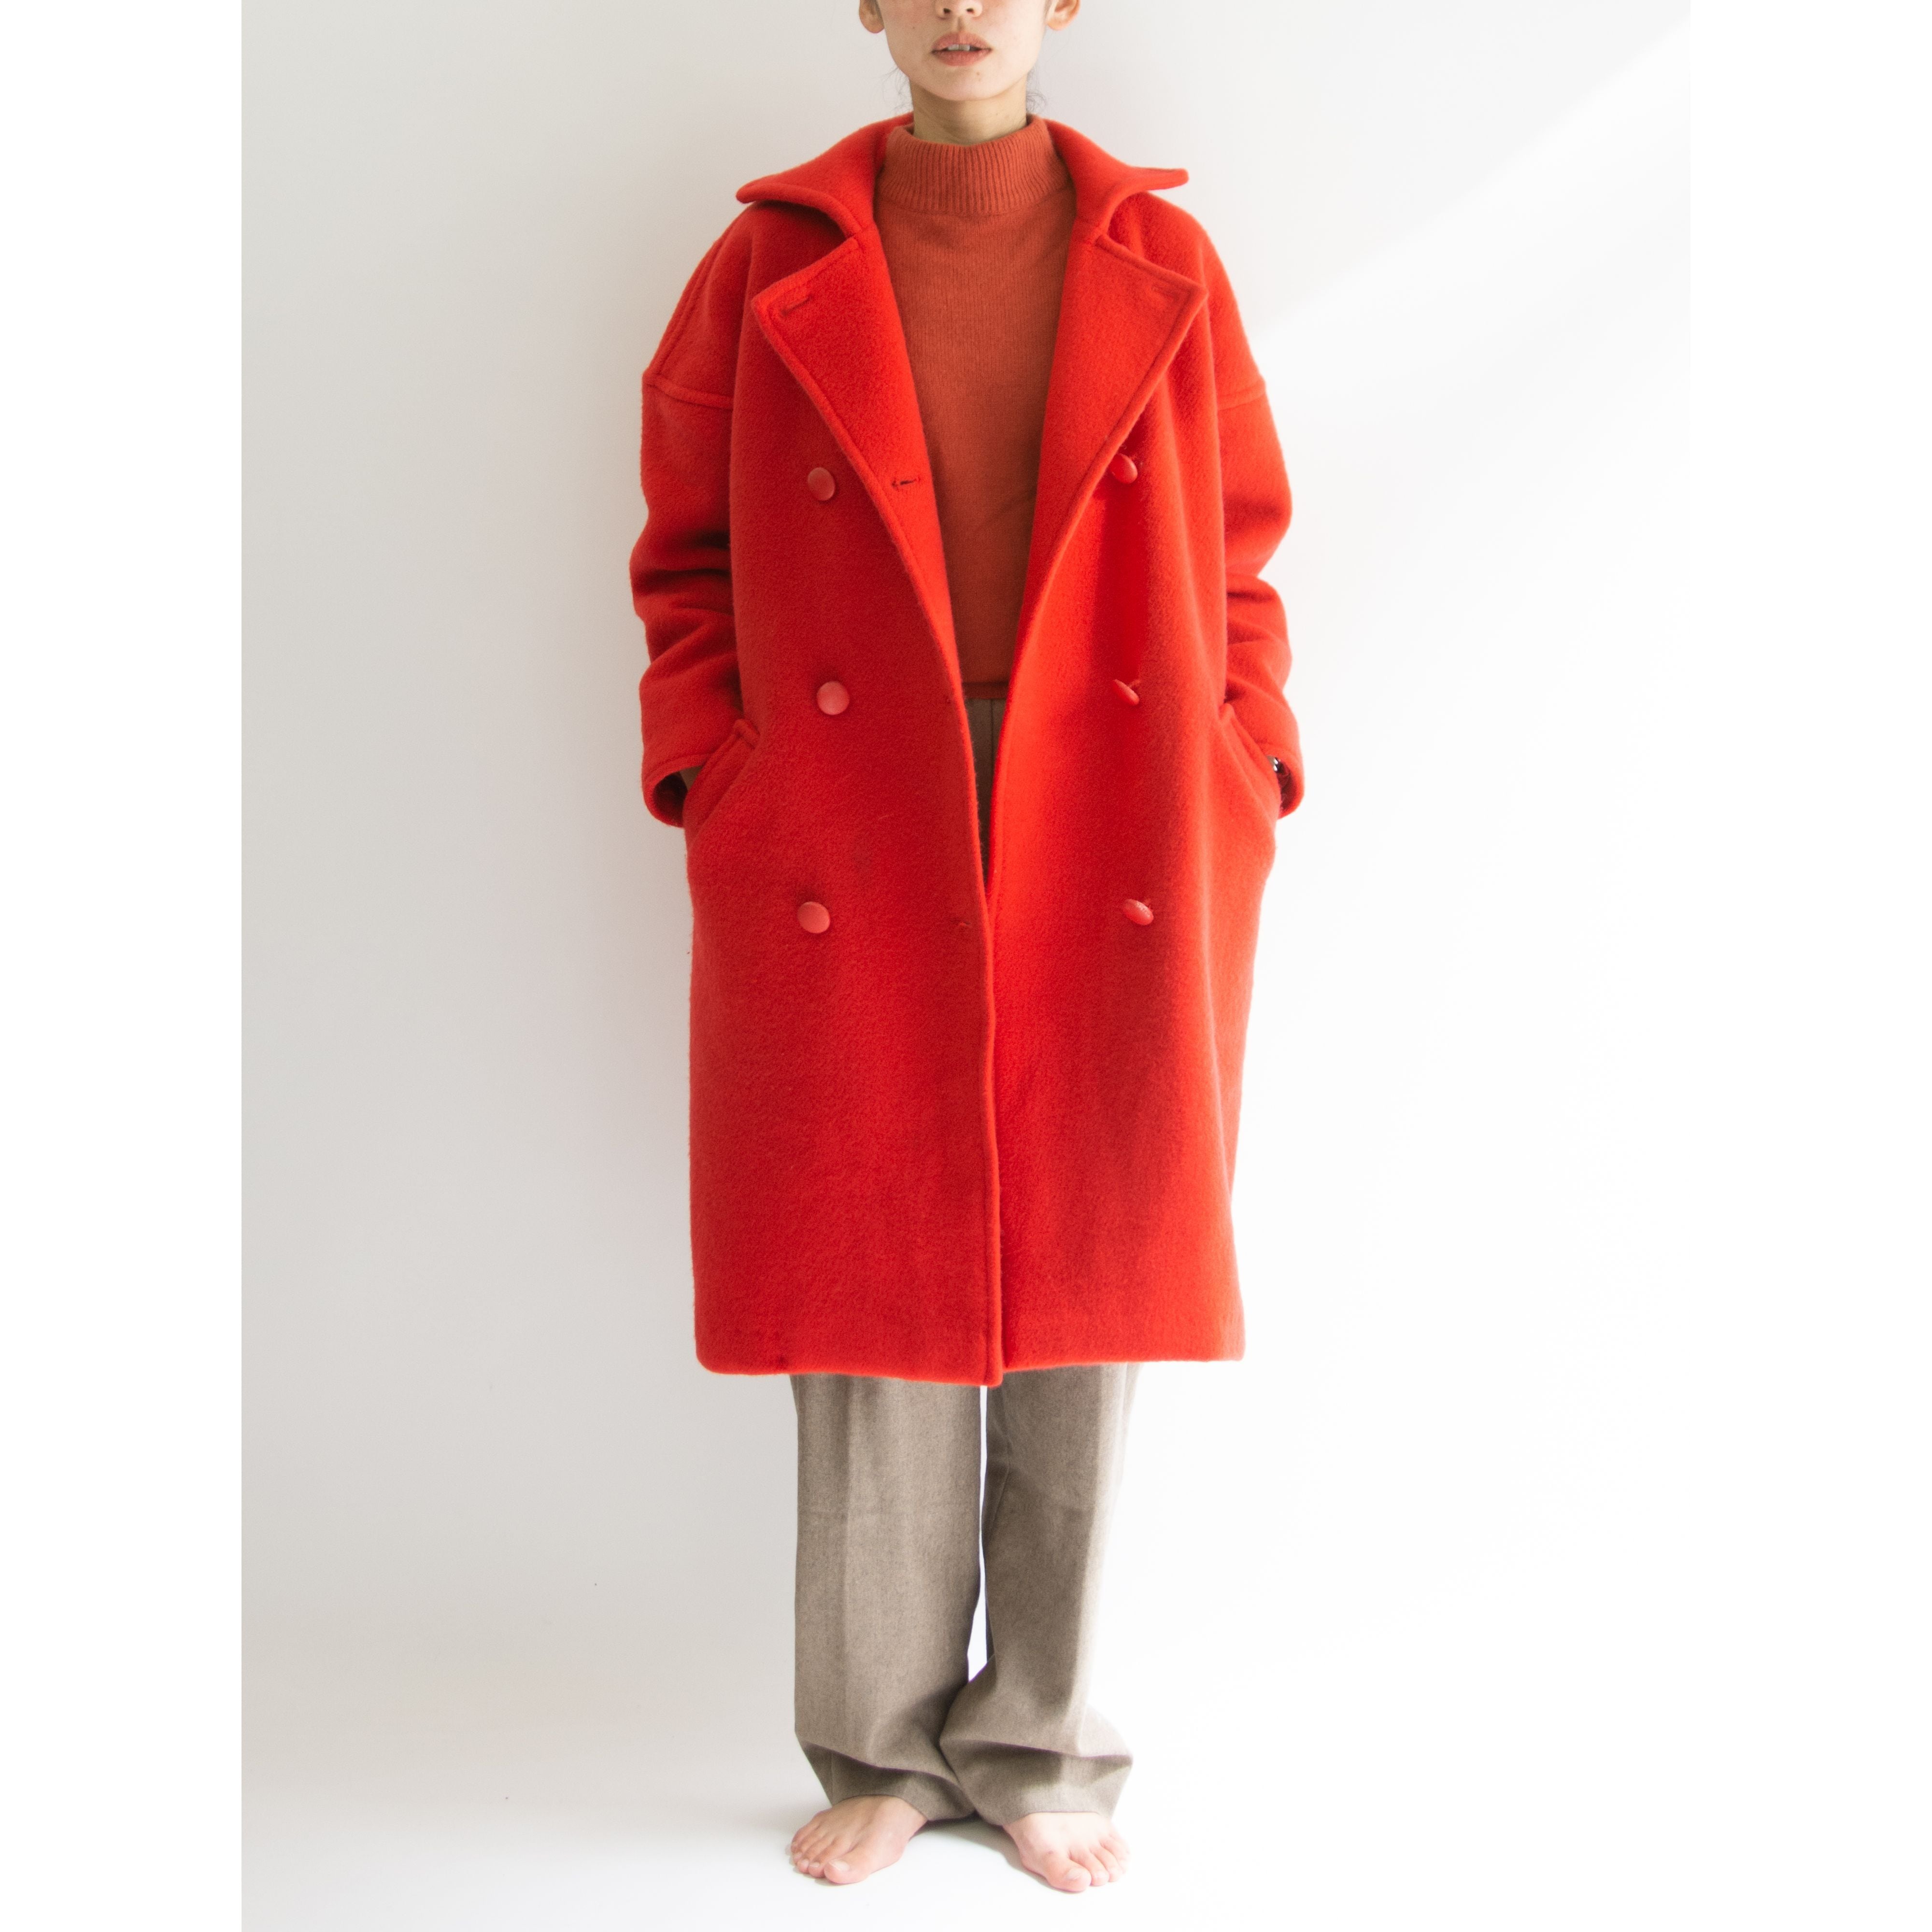 courreges paris】Made in France 70-80's Wool-Nylon Oversized Coat ...